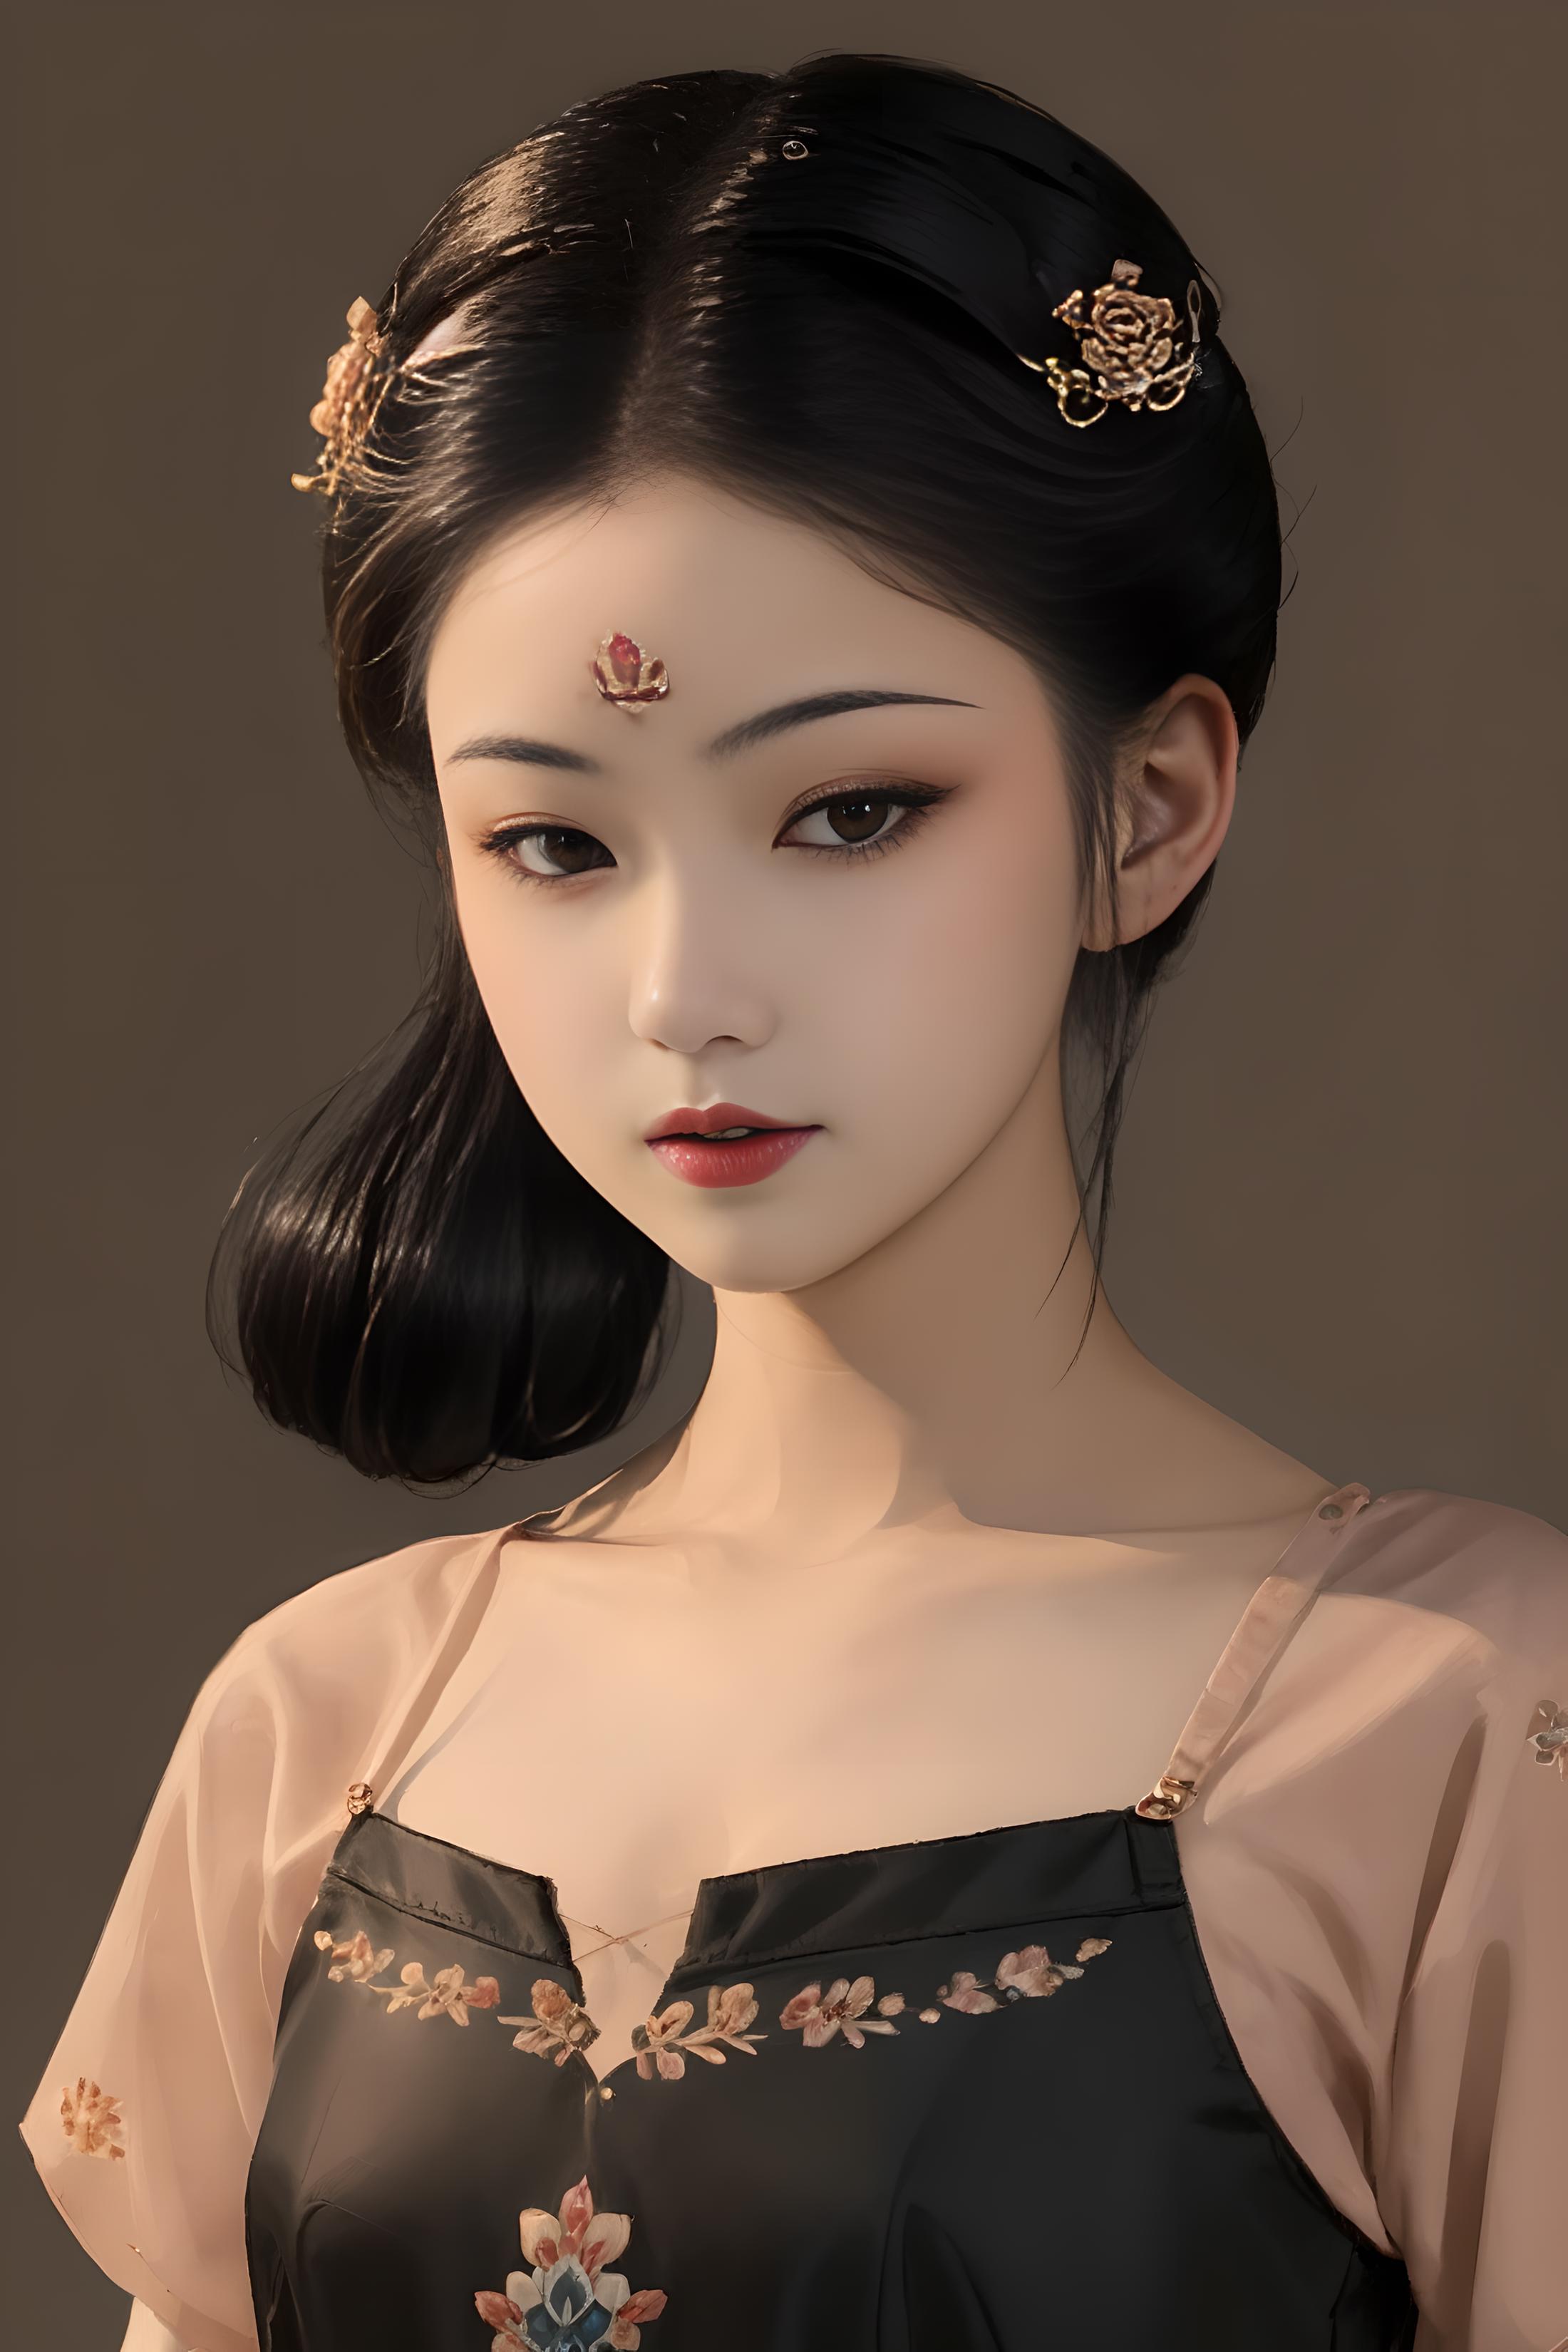 AI model image by songwei2698